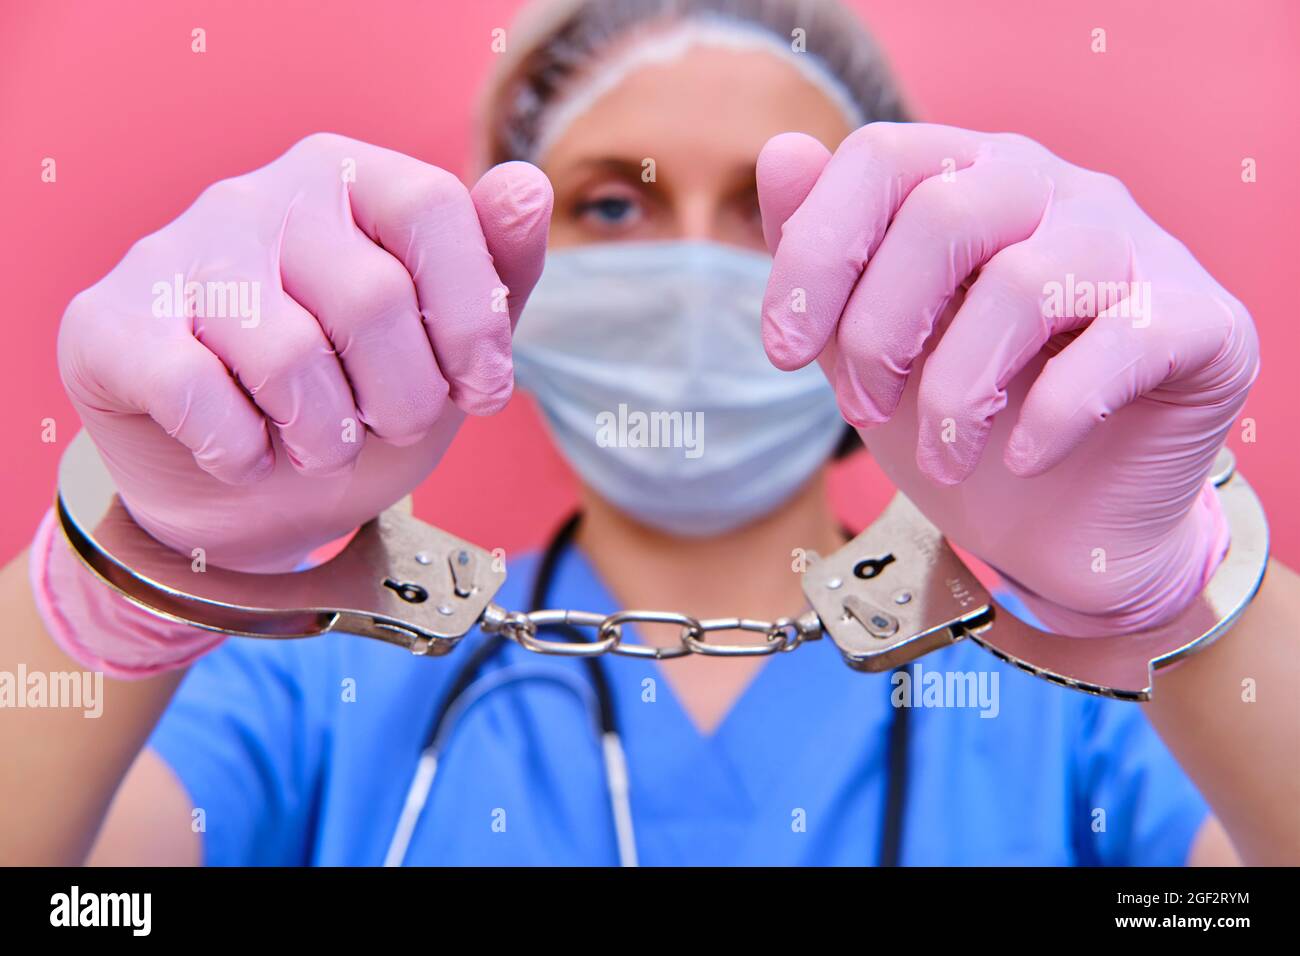 Concept of stay at home. The hands of a medic in protective gloves and medical uniforms are handcuffed, close-up Stock Photo